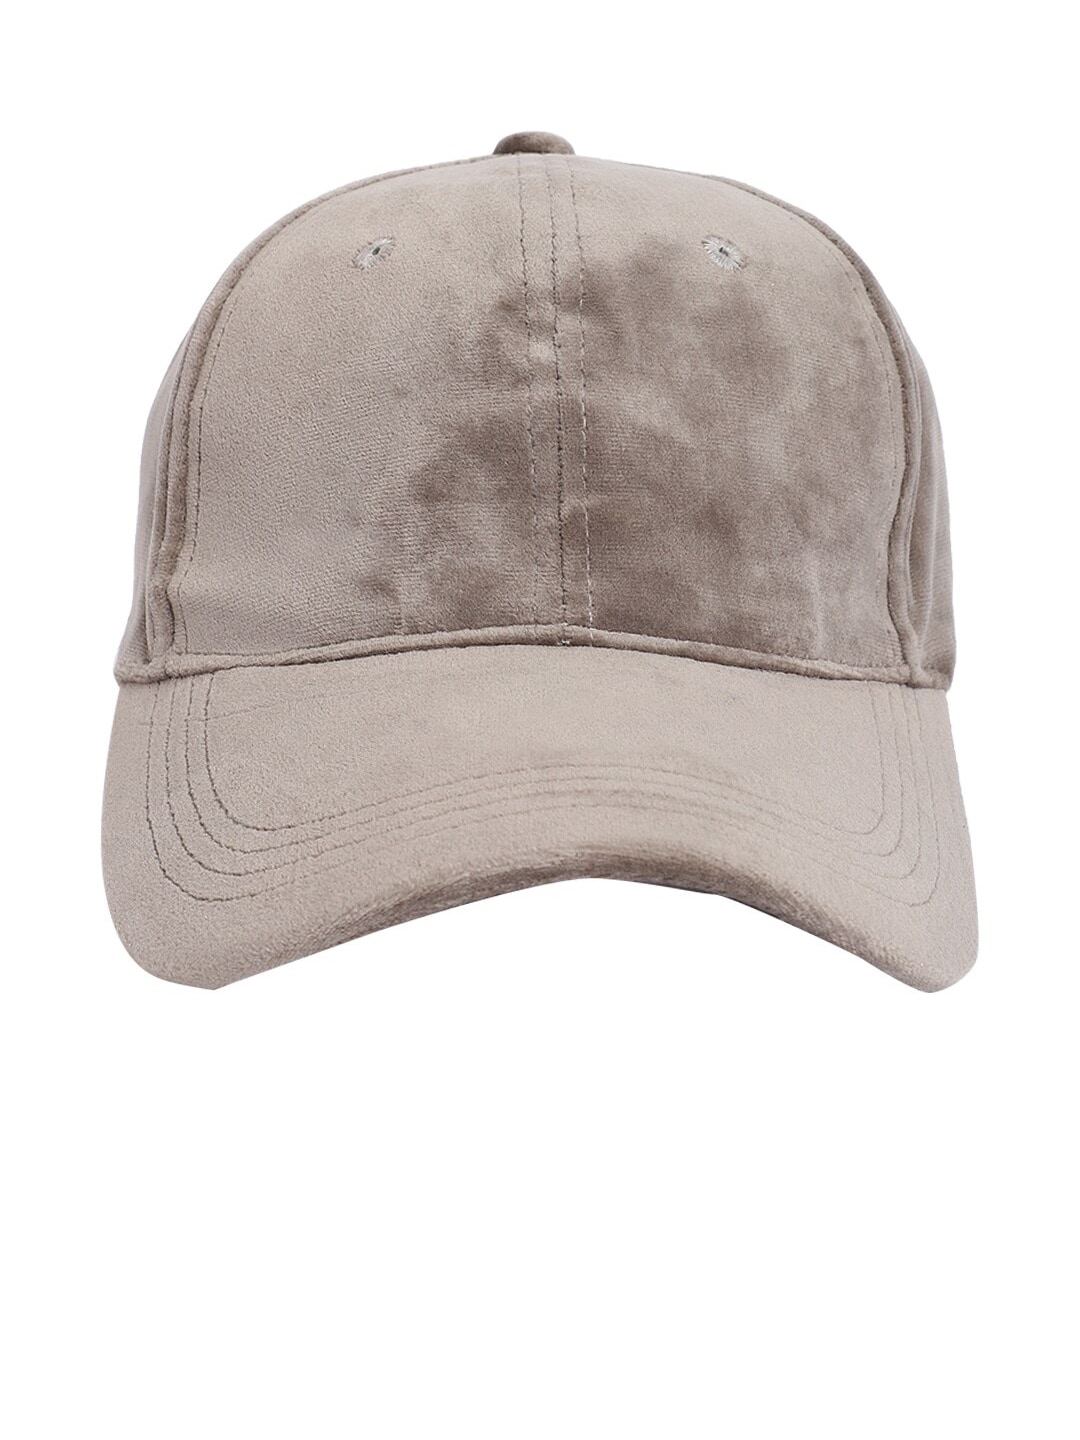 QUIRKY Unisex Grey Solid Baseball Cap Price in India